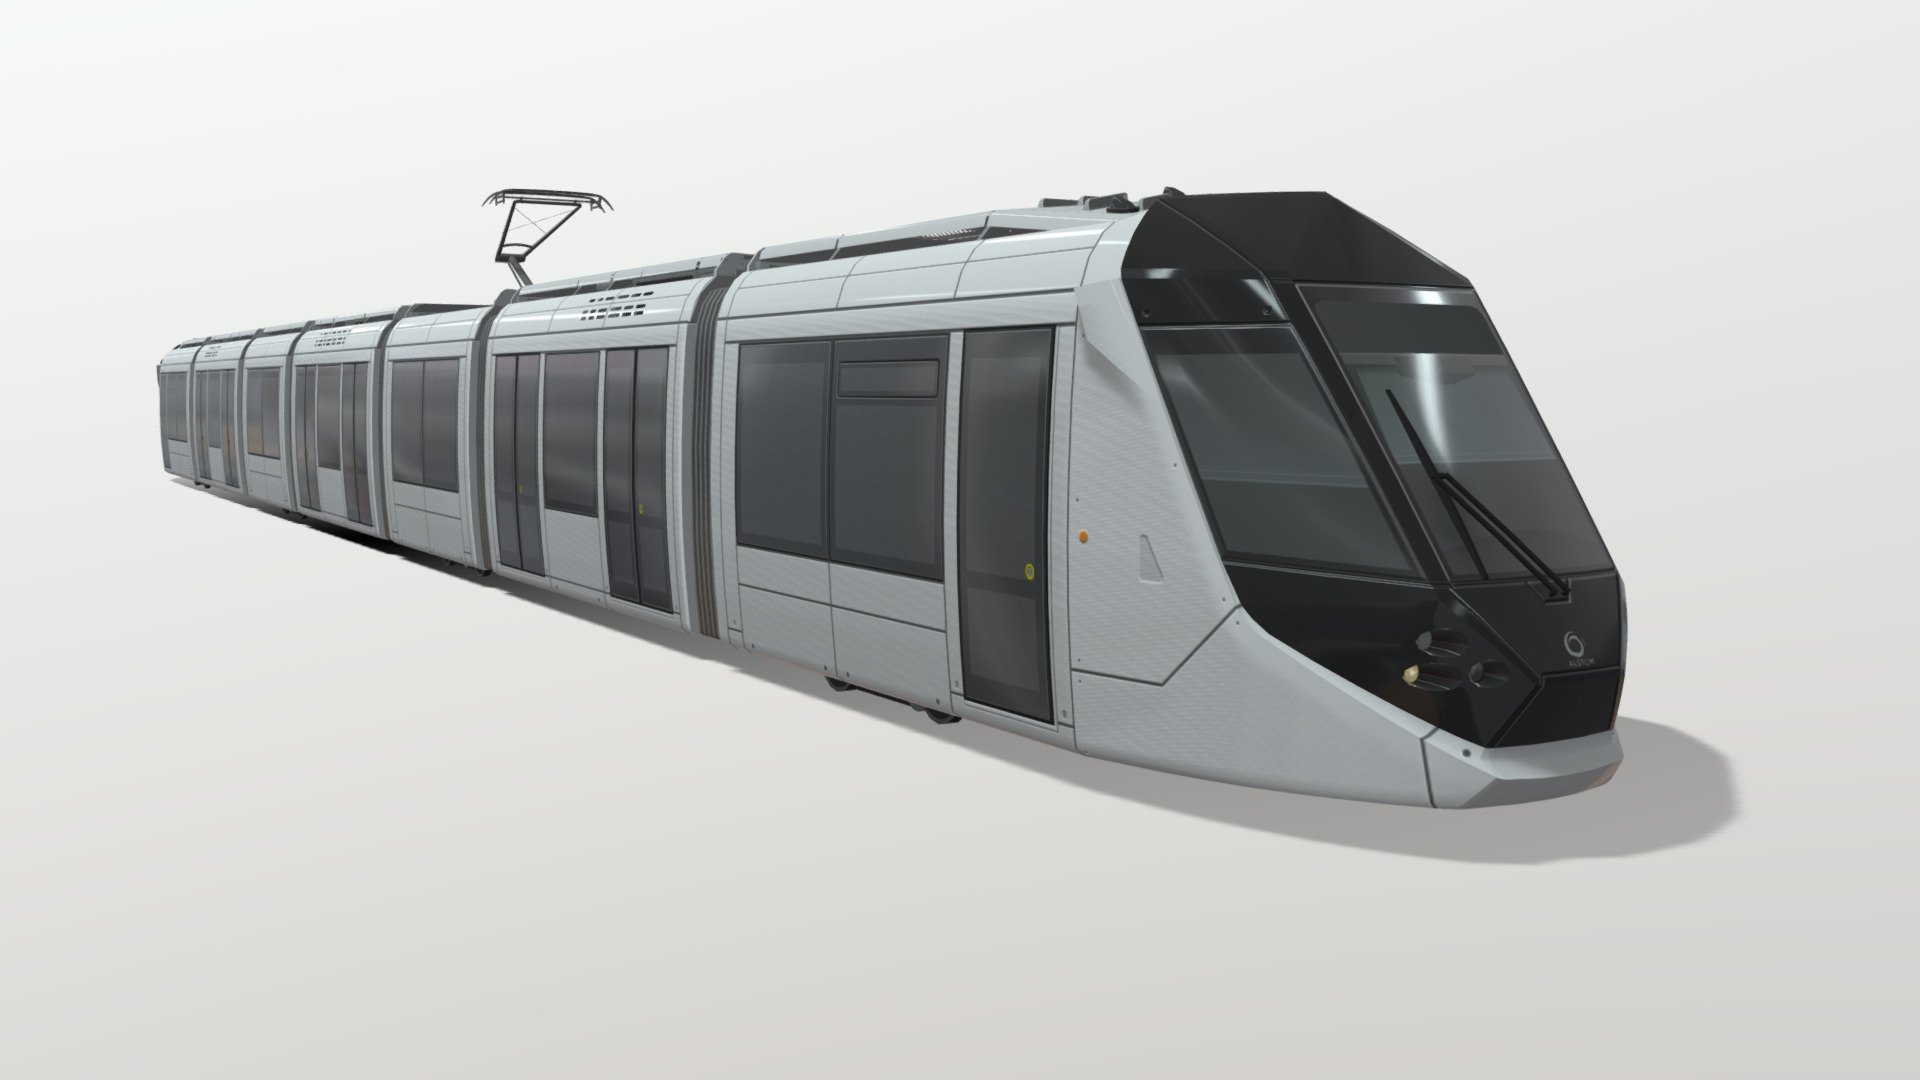 The Dubai Tram is a modern low-floor tram based on the Alstom Citadis 402/XO2 family. The network is the fourth tramway project in the world to be powered by the Alstom APS ground-based electric supply system, although a pantograph is still present for use in maintenance depots.

This model was originally made as an asset for the game Cities: Skylines. There are some minor simplifications to the texture and model to keep it optimised for the game.

Available formats: Wavefront OBJ (.obj), Autodesk FBX (.fbx), STL (.stl), Blender (.blend)

Polygon count: 9,146 Vertex count: 16,397 - Alstom Citadis 402 - Dubai Tram - Buy Royalty Free 3D model by Nostrix 3d model